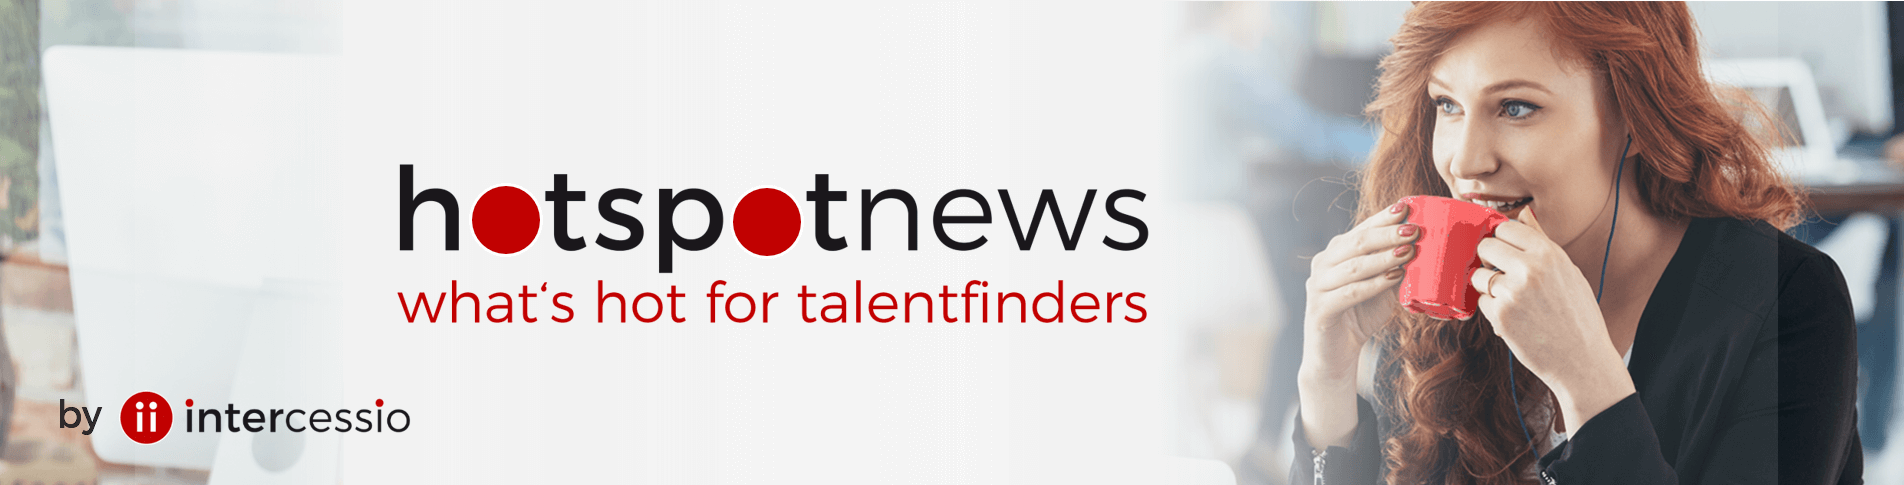 Intercessio Hotspot News - What is hot for Talentfinders